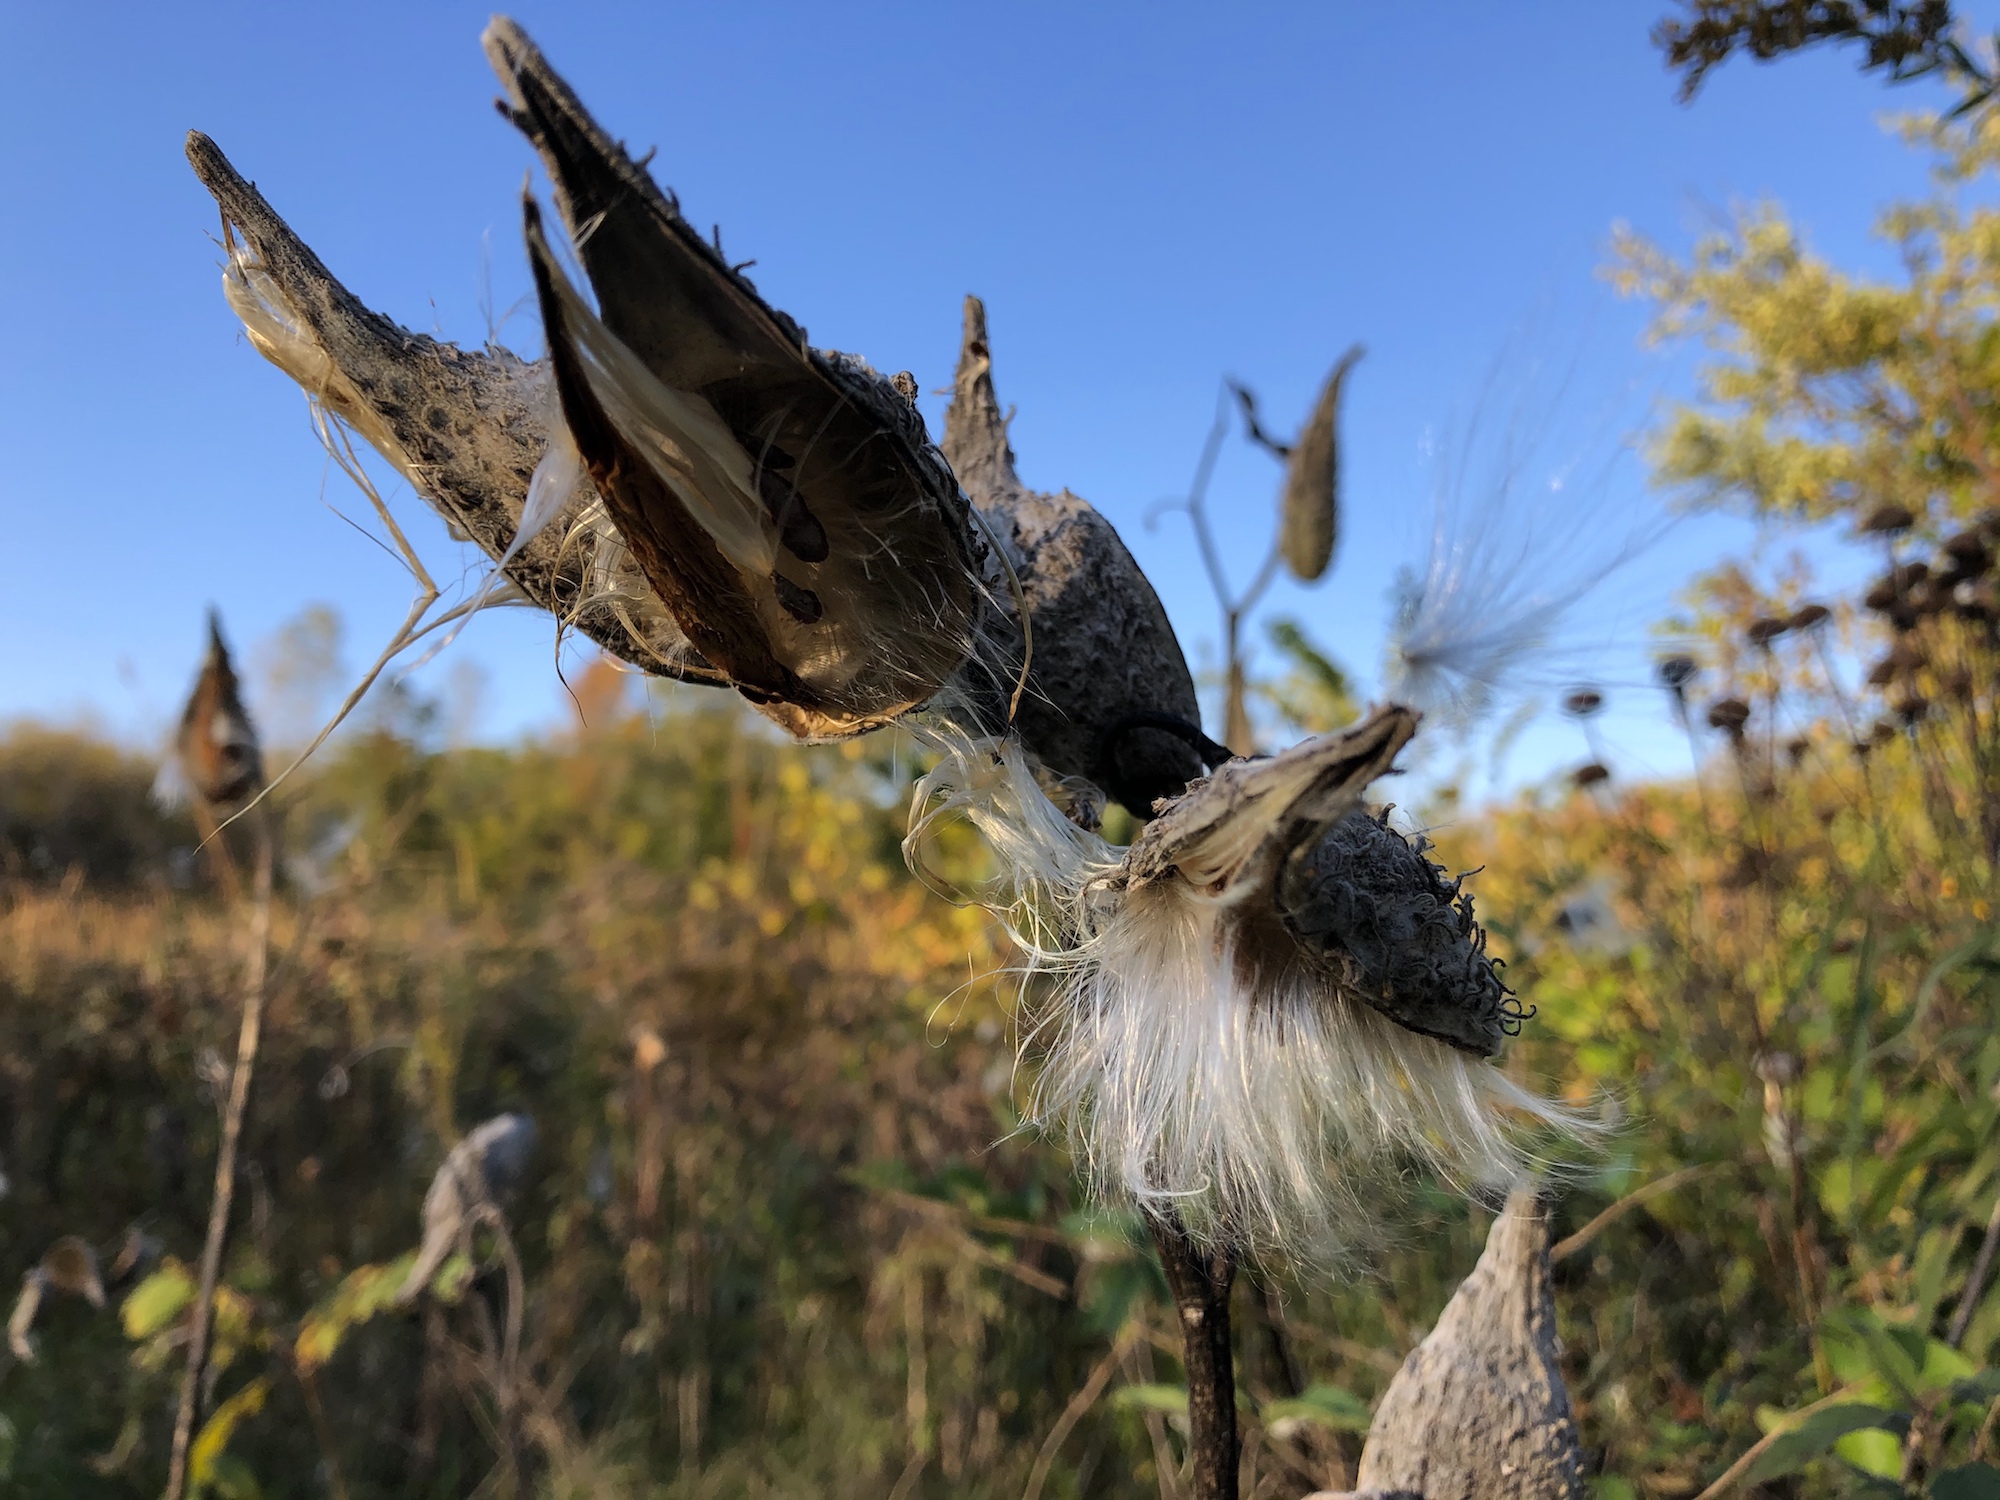 Common Milkweed on shore of Marion Dunn Pond on October 12, 2019.